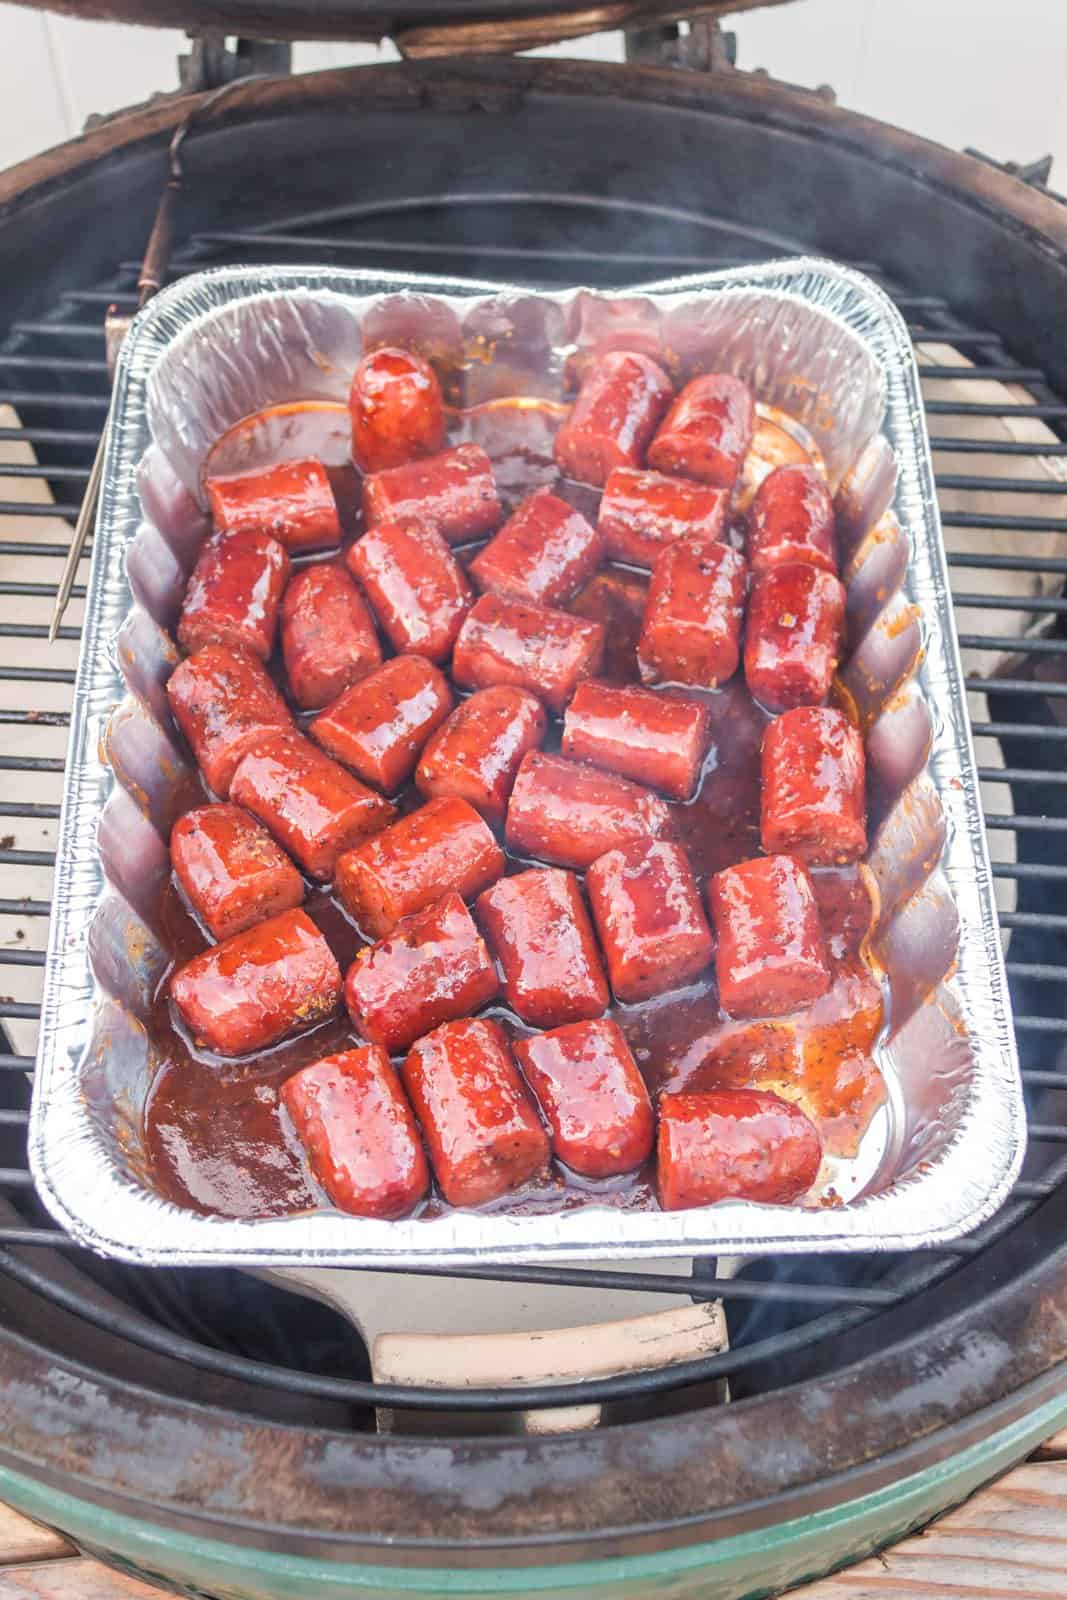 Cut up hot dogs with seasoning and sauce in an aluminum pan on a grill.